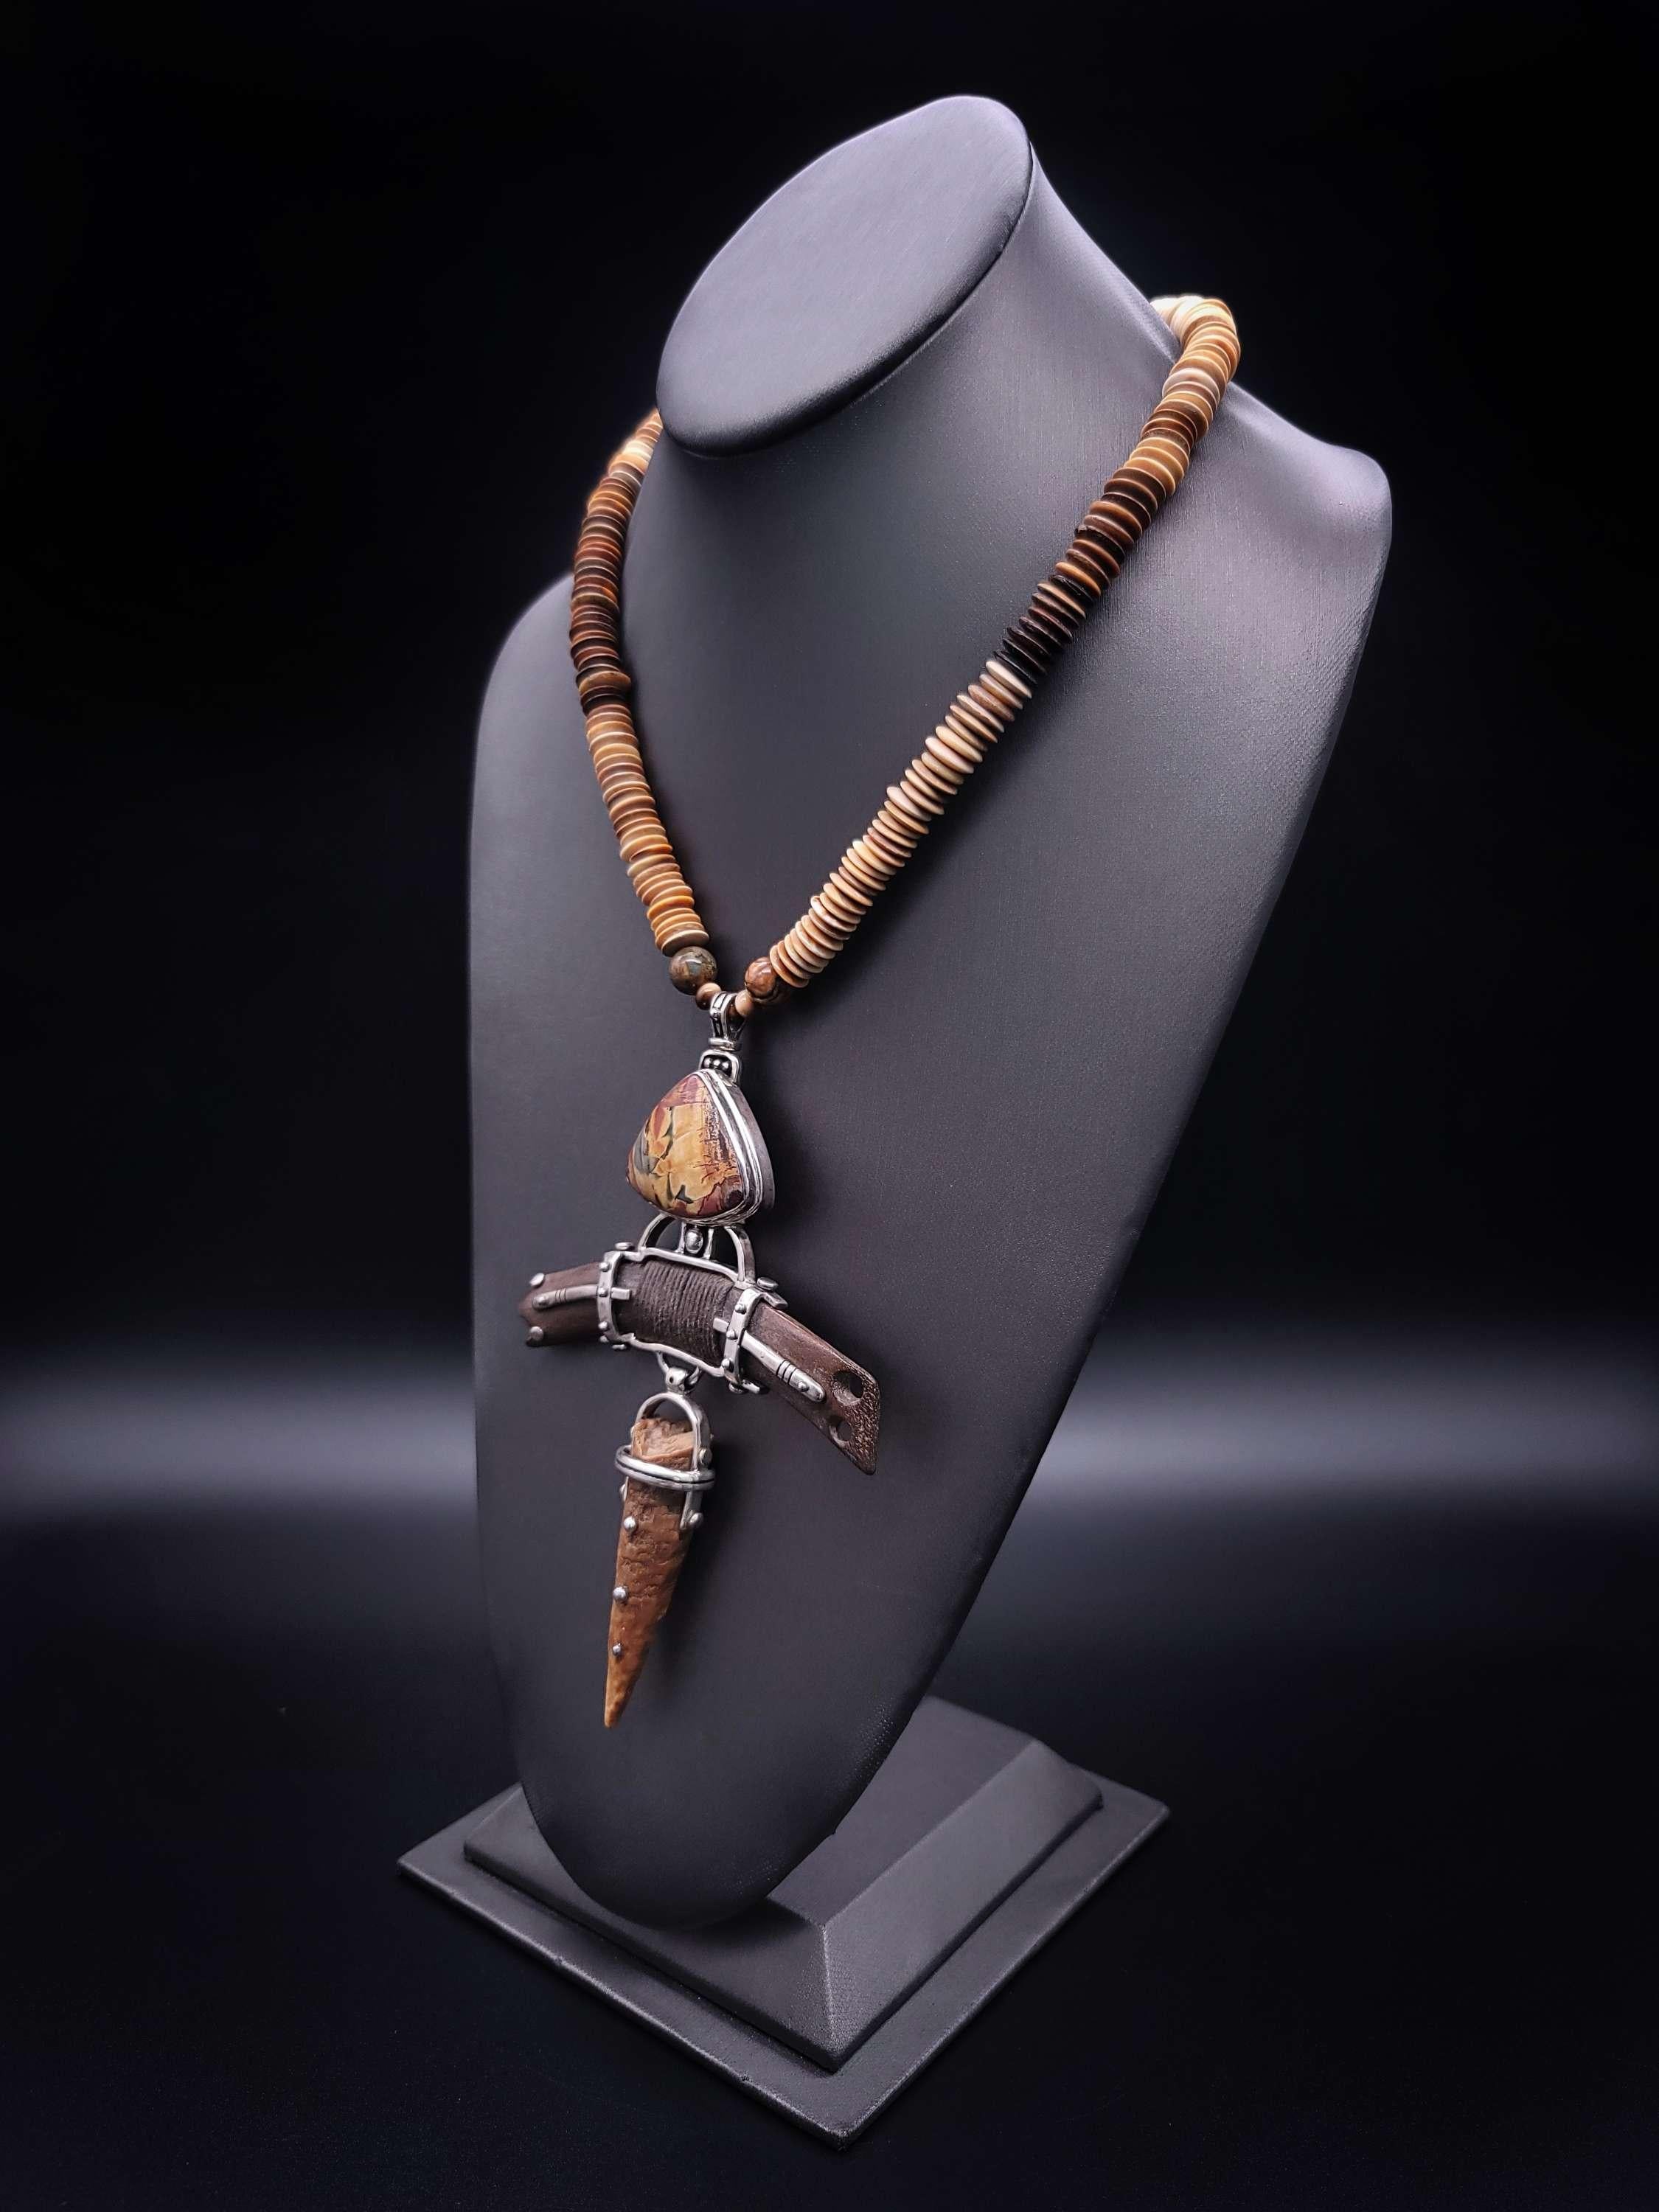 
Introducing a stunning one-of-a-kind necklace that exudes elegance and sophistication. This piece is crafted with exquisite Tobacco Jade and Jasper beads, beautifully interspersed with Fossil beads, creating a unique and striking design. The